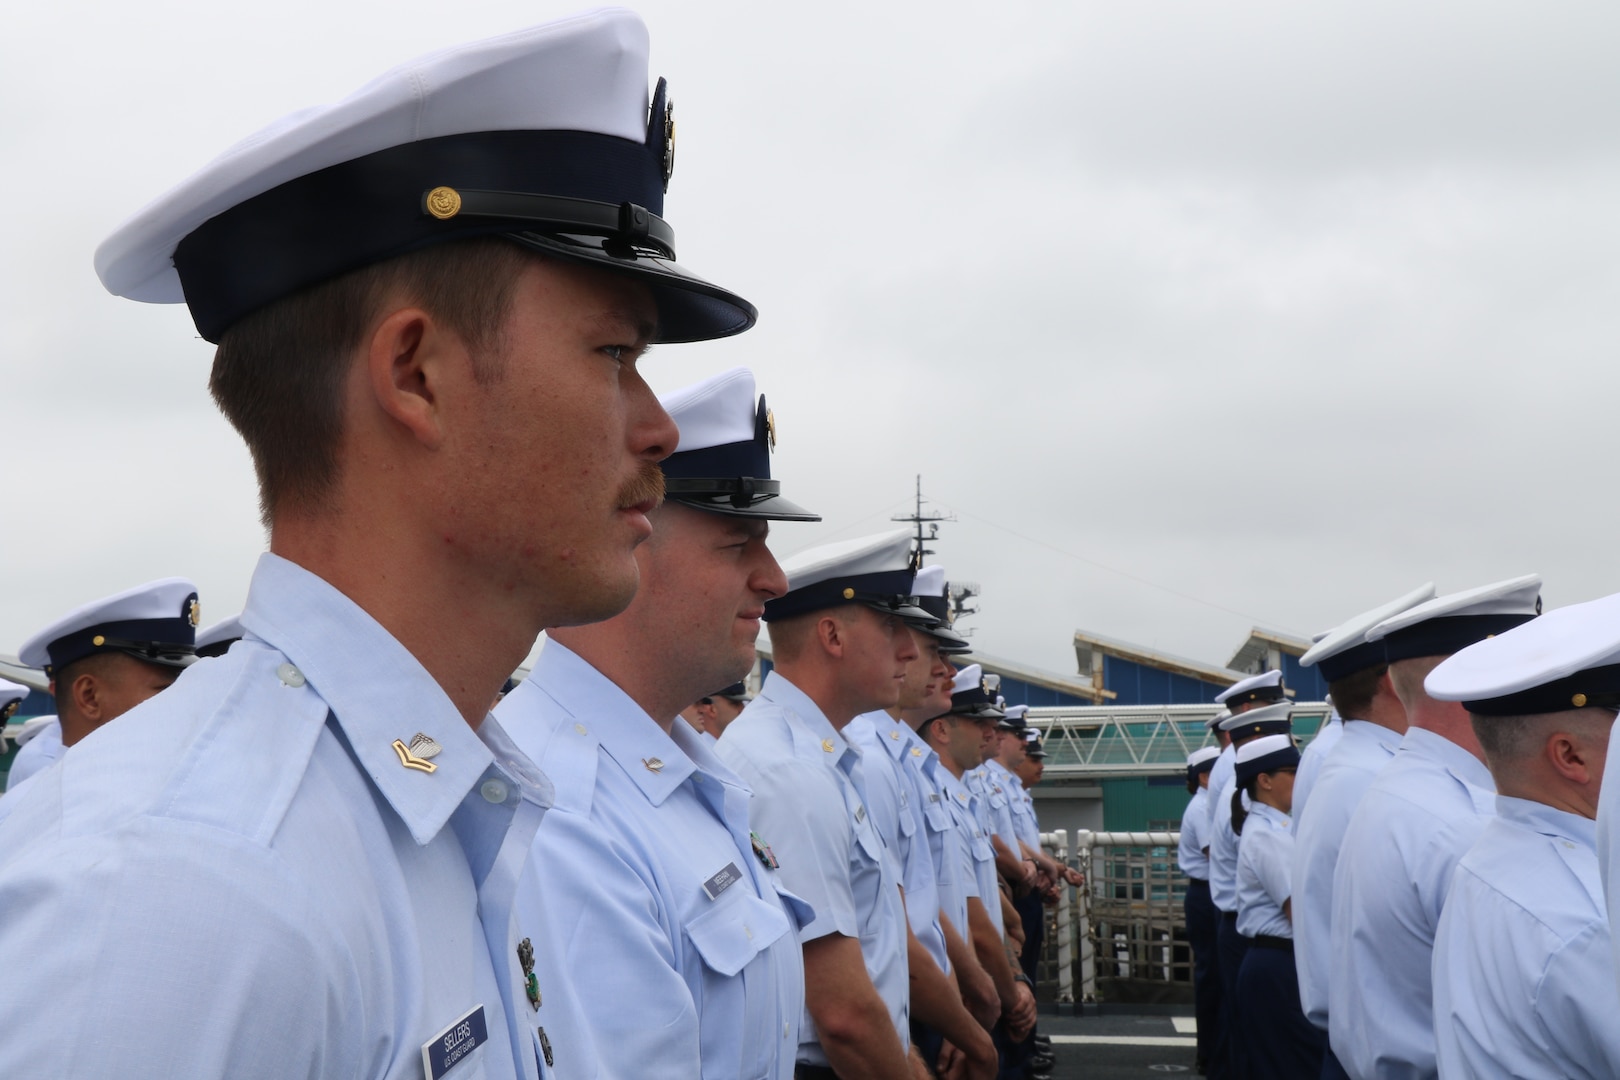 U.S. Coast Guard Cutter Munro’s (WMSL 755) crewmembers file in during the Munro’s change of command ceremony on May 30, 2024. Vice Adm. Andrew J. Tiongson, Commander, U.S. Coast Guard Pacific Area, presided over the ceremony in which Capt. James O’Mara relieved Capt. Rula Deisher as Munro’s commanding officer. U.S. Coast Guard photo by Ensign Samika Lewis.